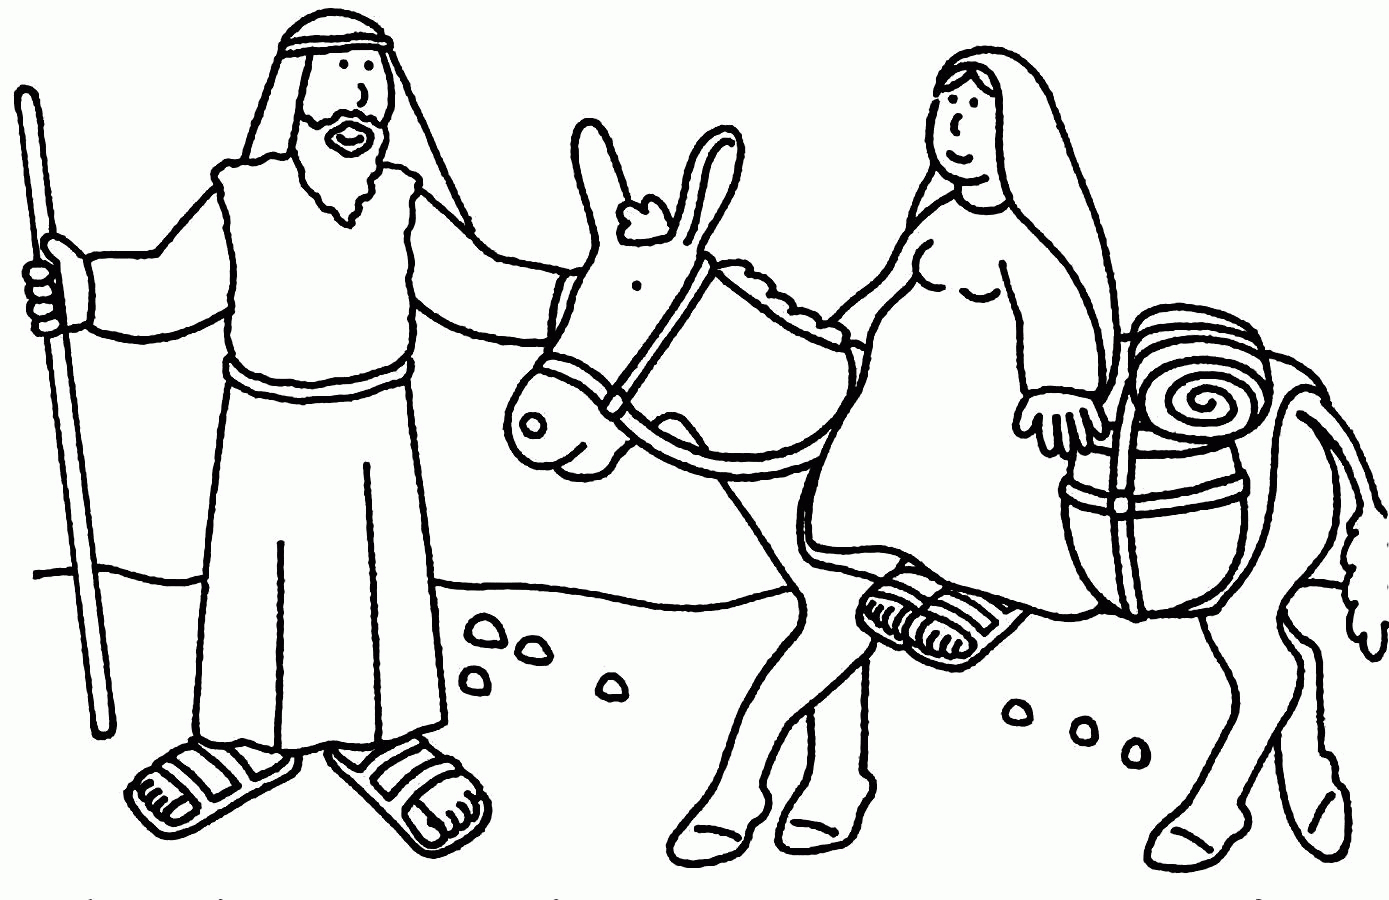 Coloring Ideas : Bible School Coloring Pages Ideas Sunday Christmas - Free Printable Bible Story Coloring Pages